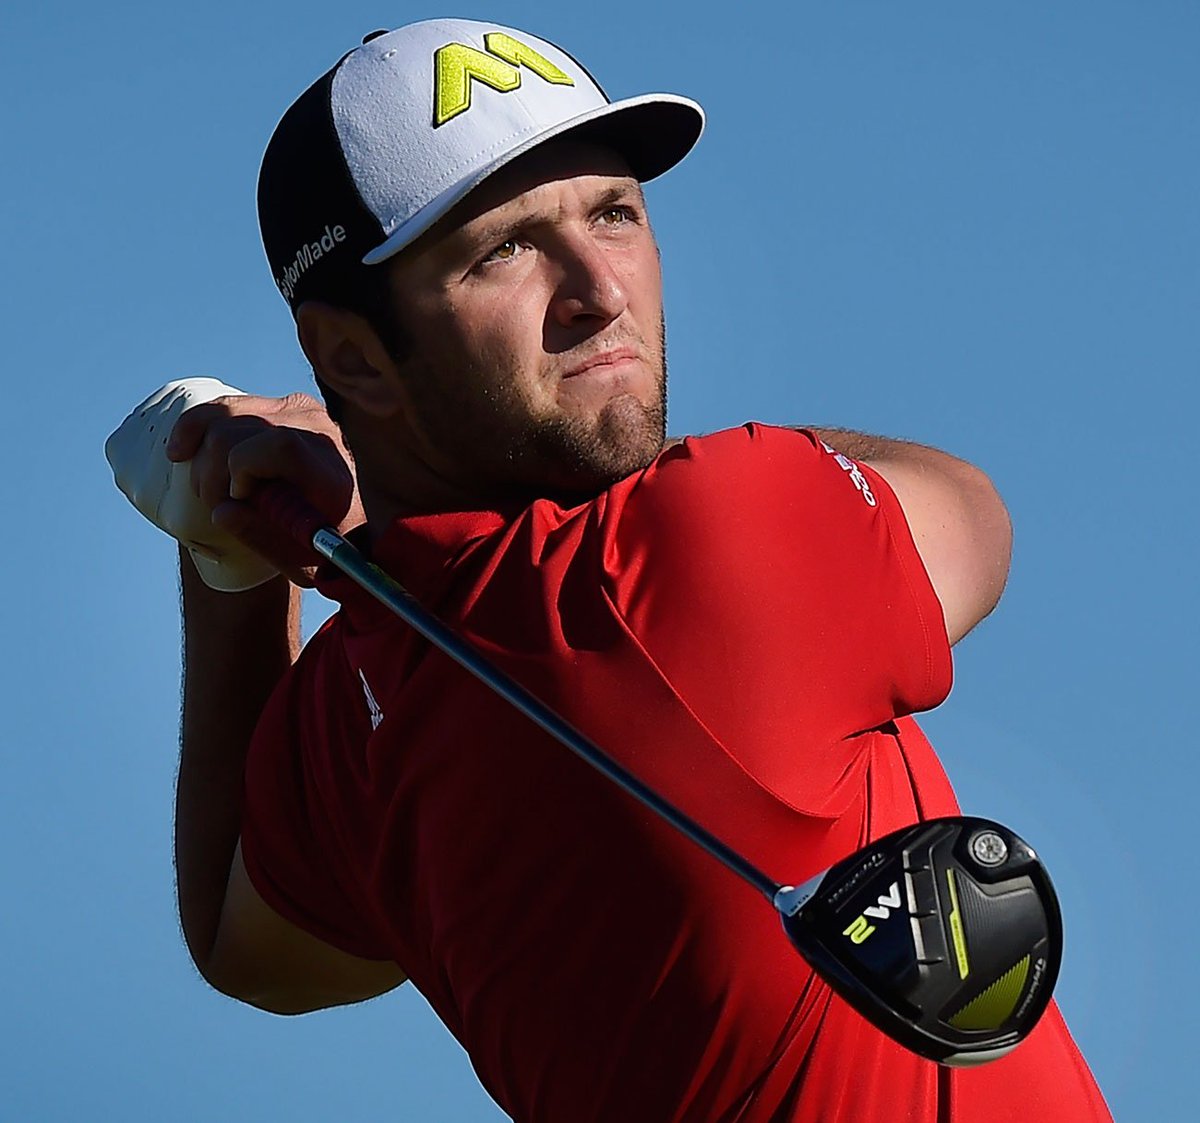 Steal JonRahmpga finish booming drives | GOLF.com | Scoopnest1200 x 1123